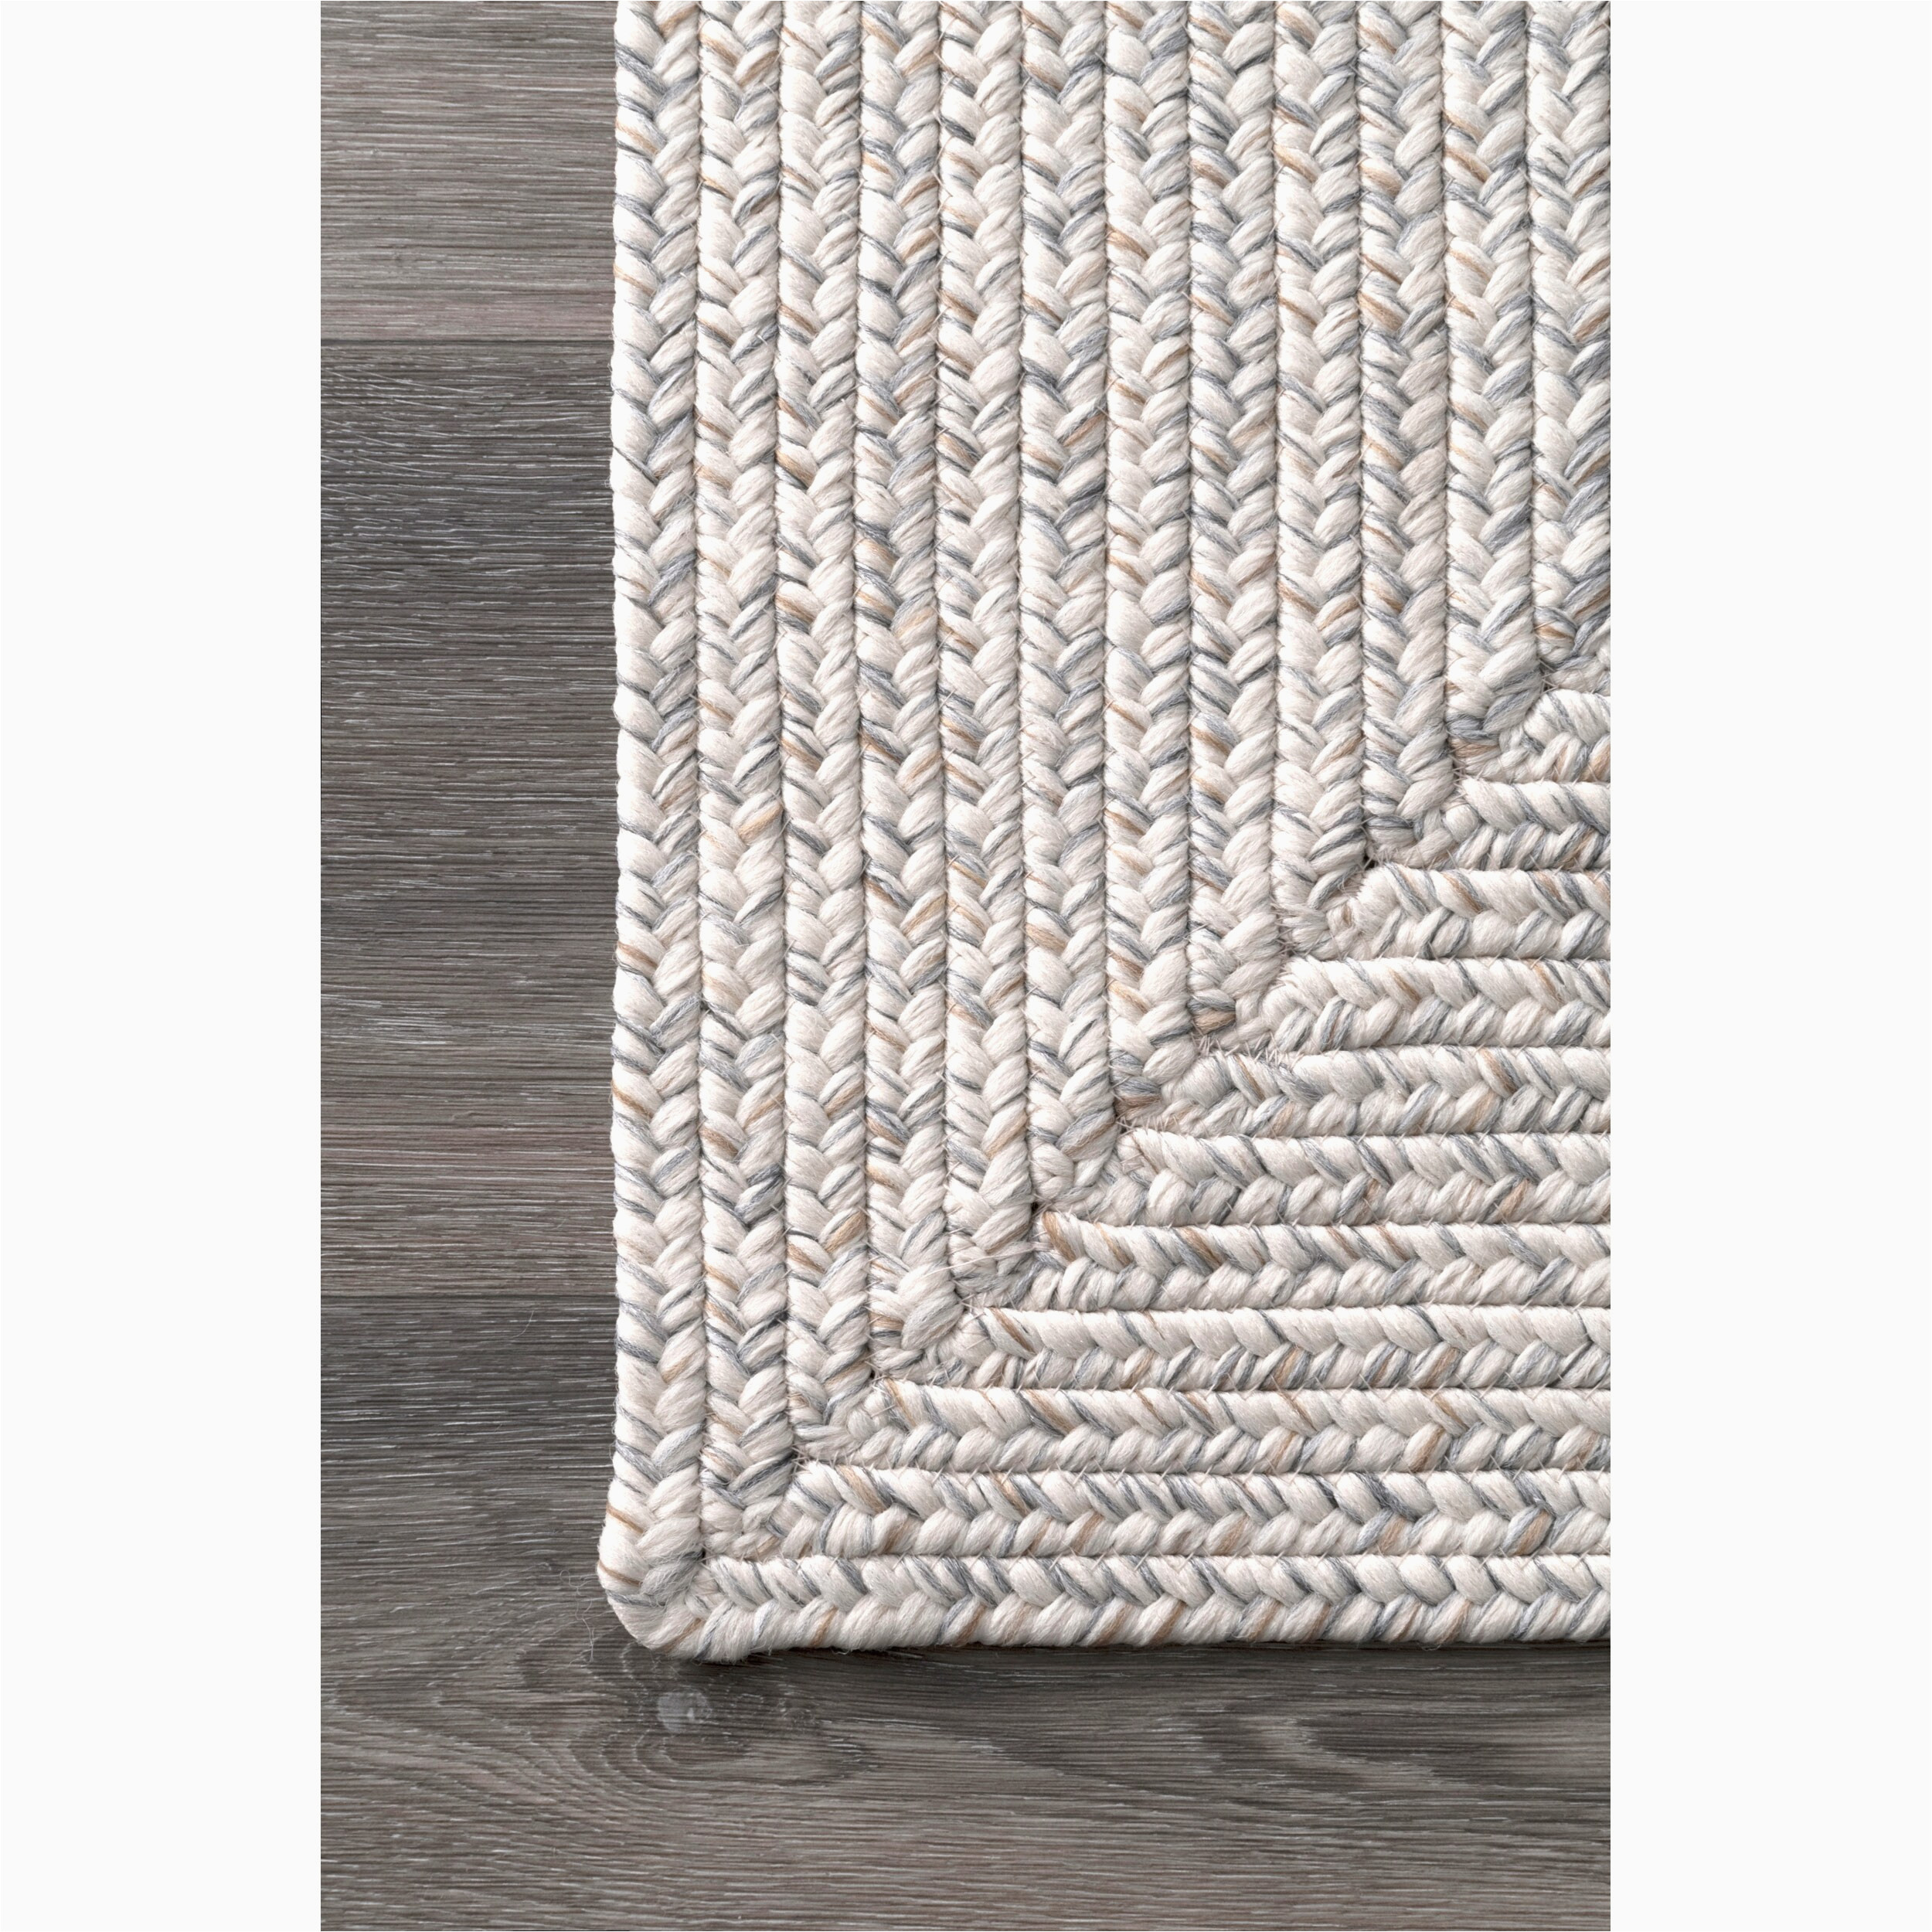 Moser Hand Braided Ivory Indoor Outdoor area Rug Nuloom Lefebvre 8 X 10 Braided Ivory Indoor solid area Rug